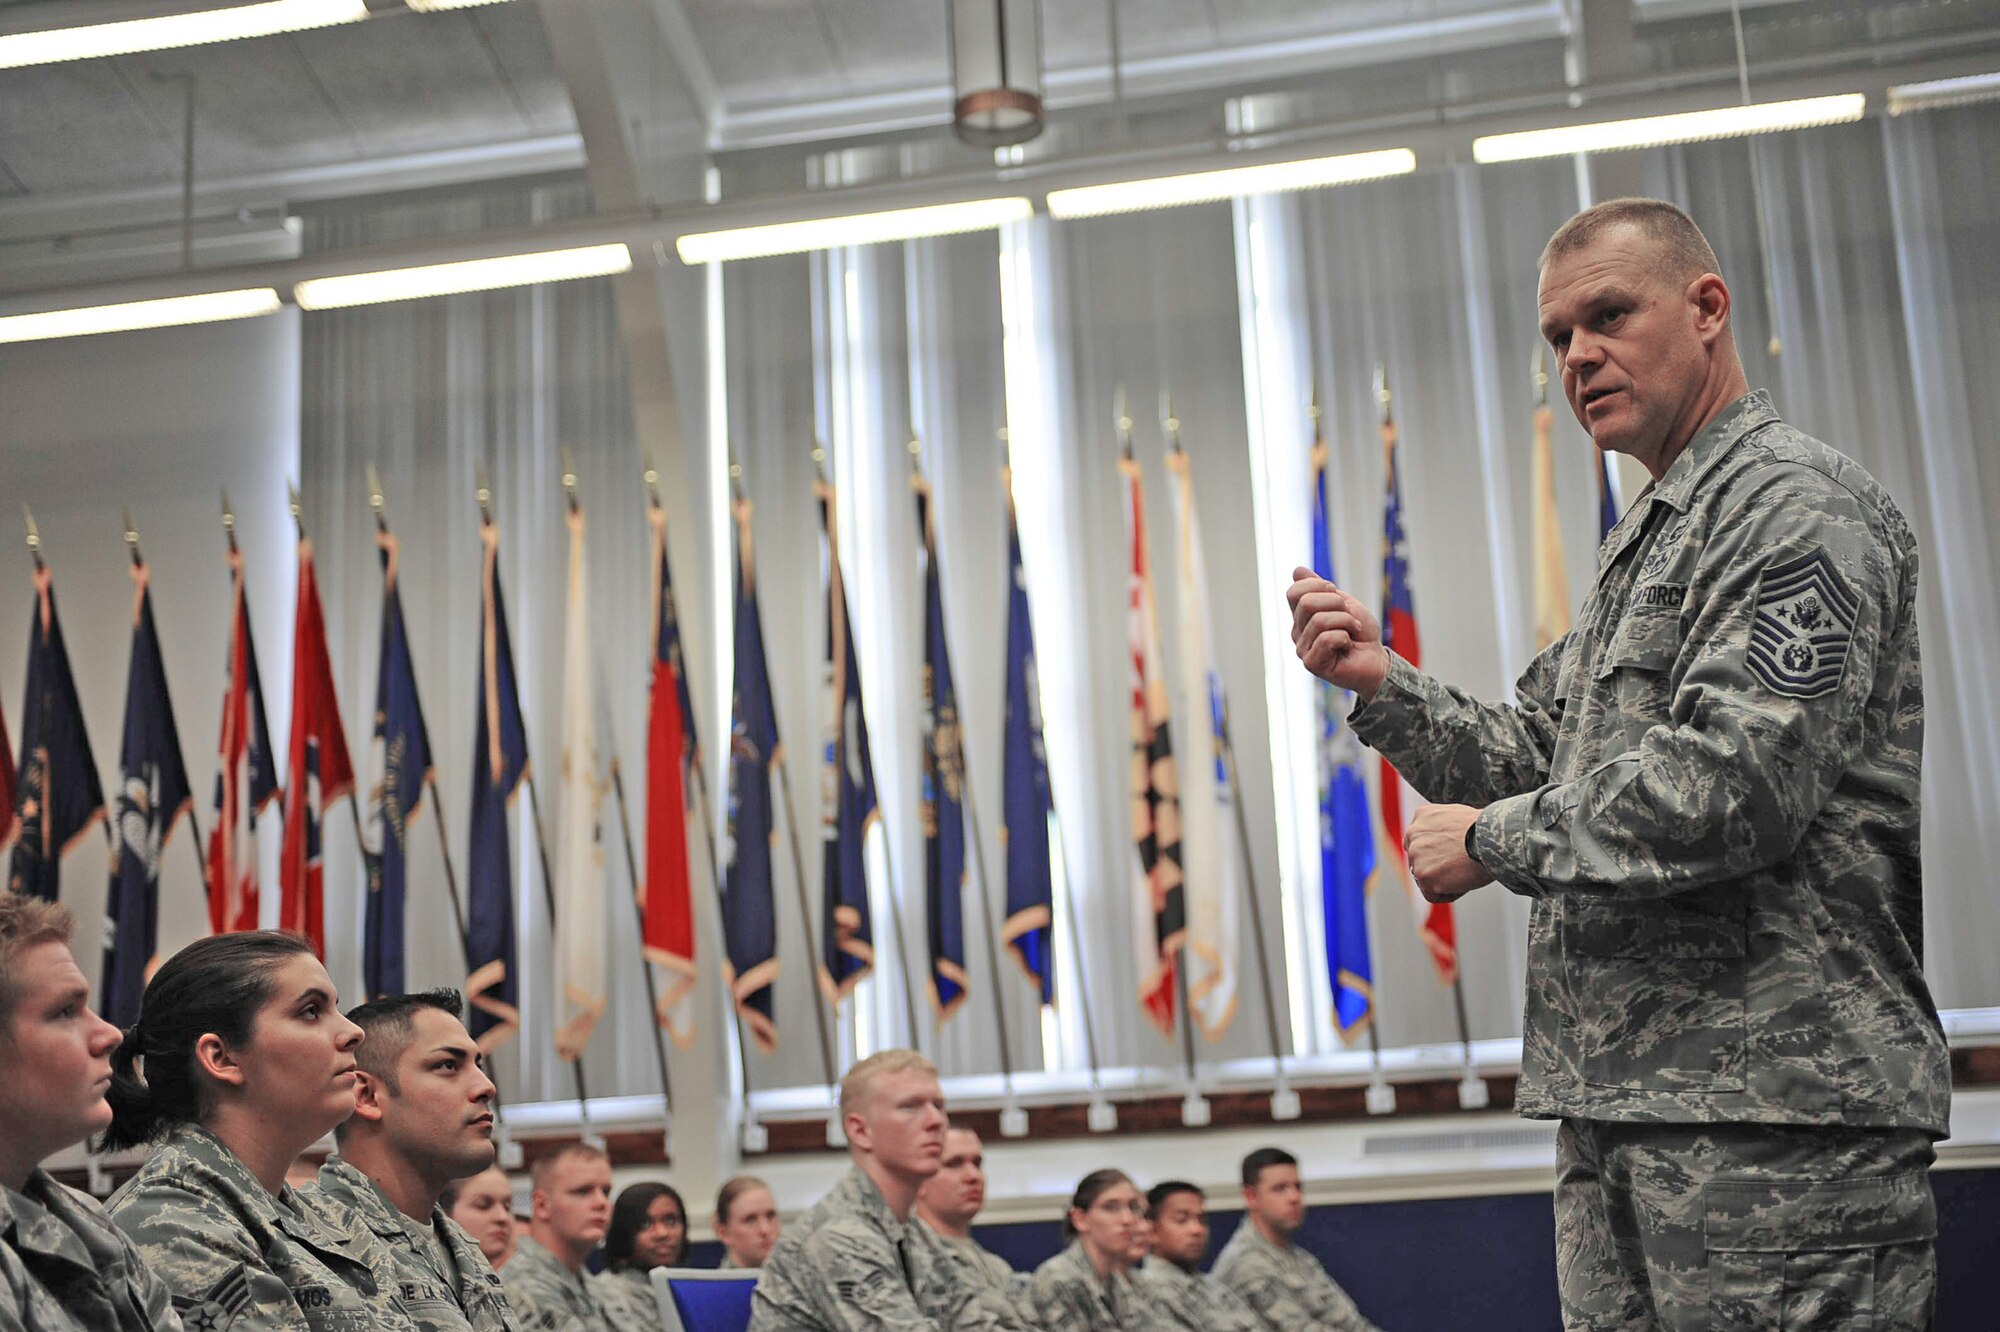 Chief Master Sgt. of the Air Force James A. Roy speaks to Airman
Leadership School students about the importance of being a good leader and
mentor Sept. 22, 2009, at Hurlburt Field, Fla. (U.S. Air Force photo/Senior Airman Julianne Showalter)